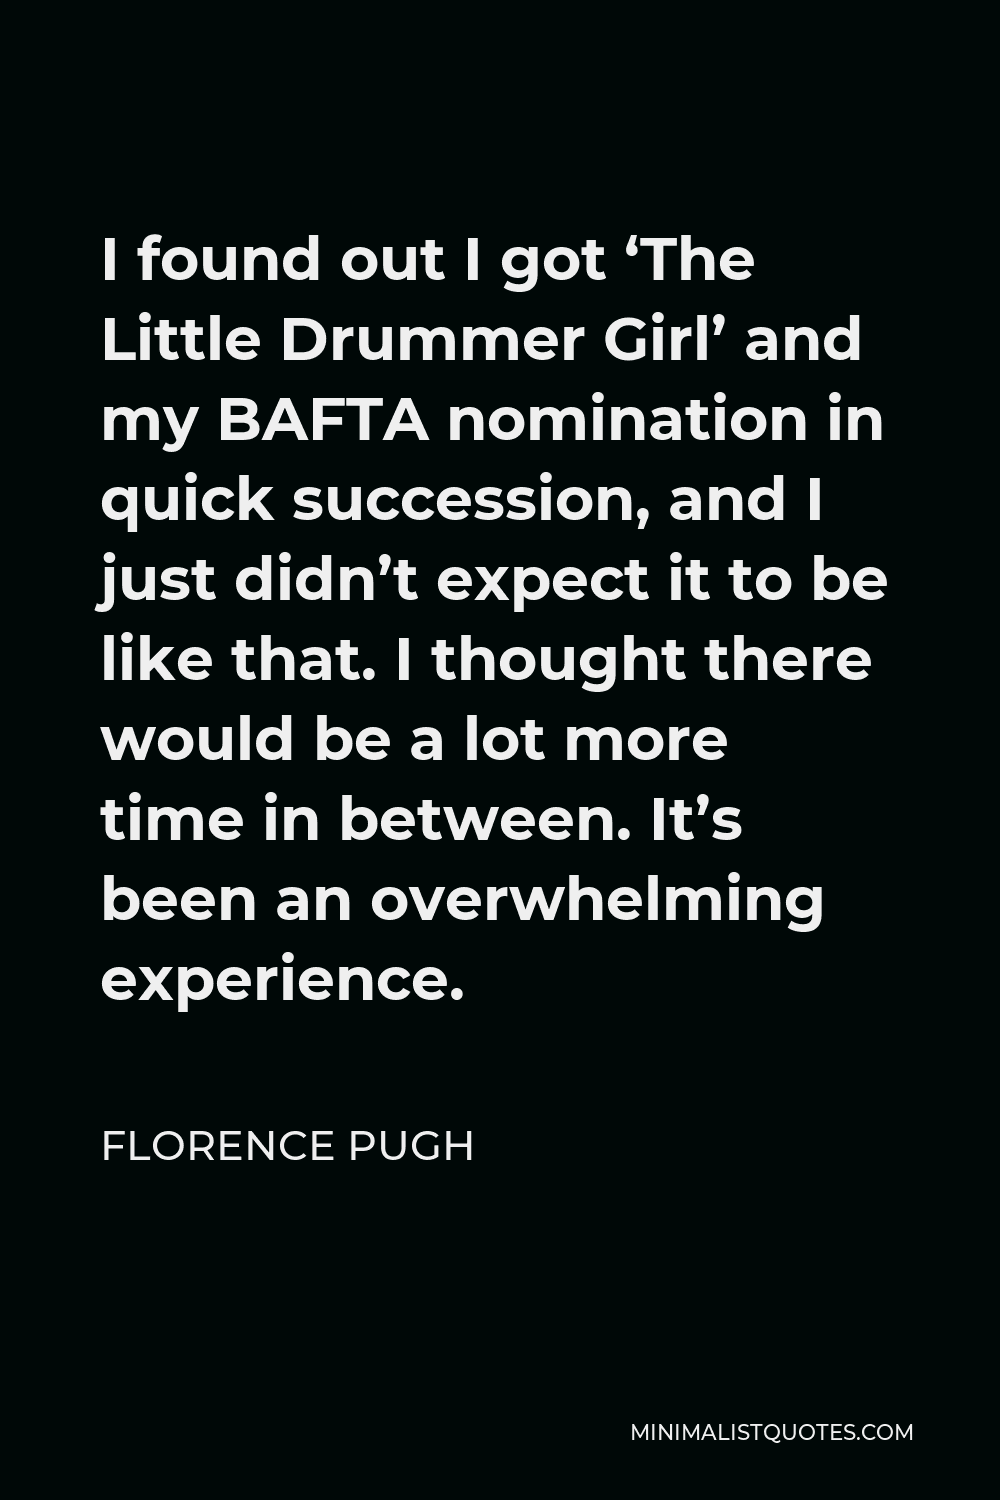 Florence Pugh Quote - I found out I got ‘The Little Drummer Girl’ and my BAFTA nomination in quick succession, and I just didn’t expect it to be like that. I thought there would be a lot more time in between. It’s been an overwhelming experience.